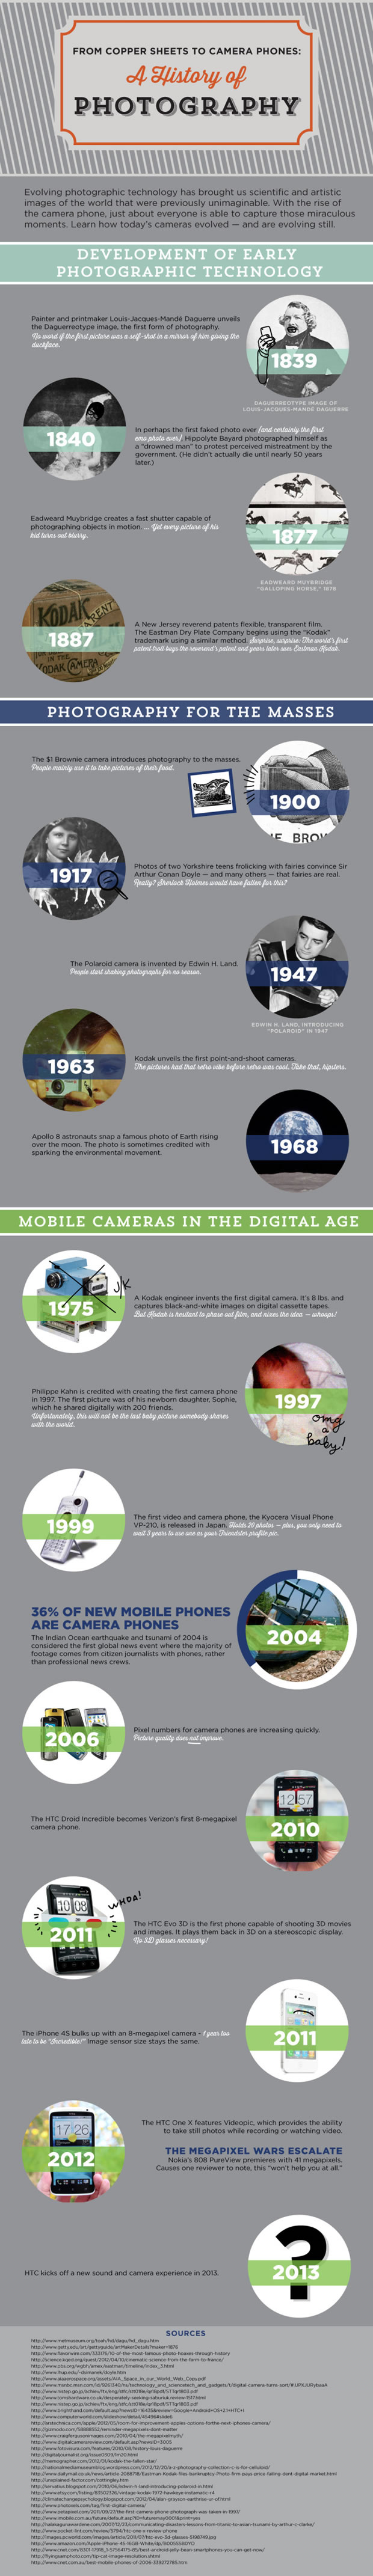 htc-camera-infographic-ultrapixel